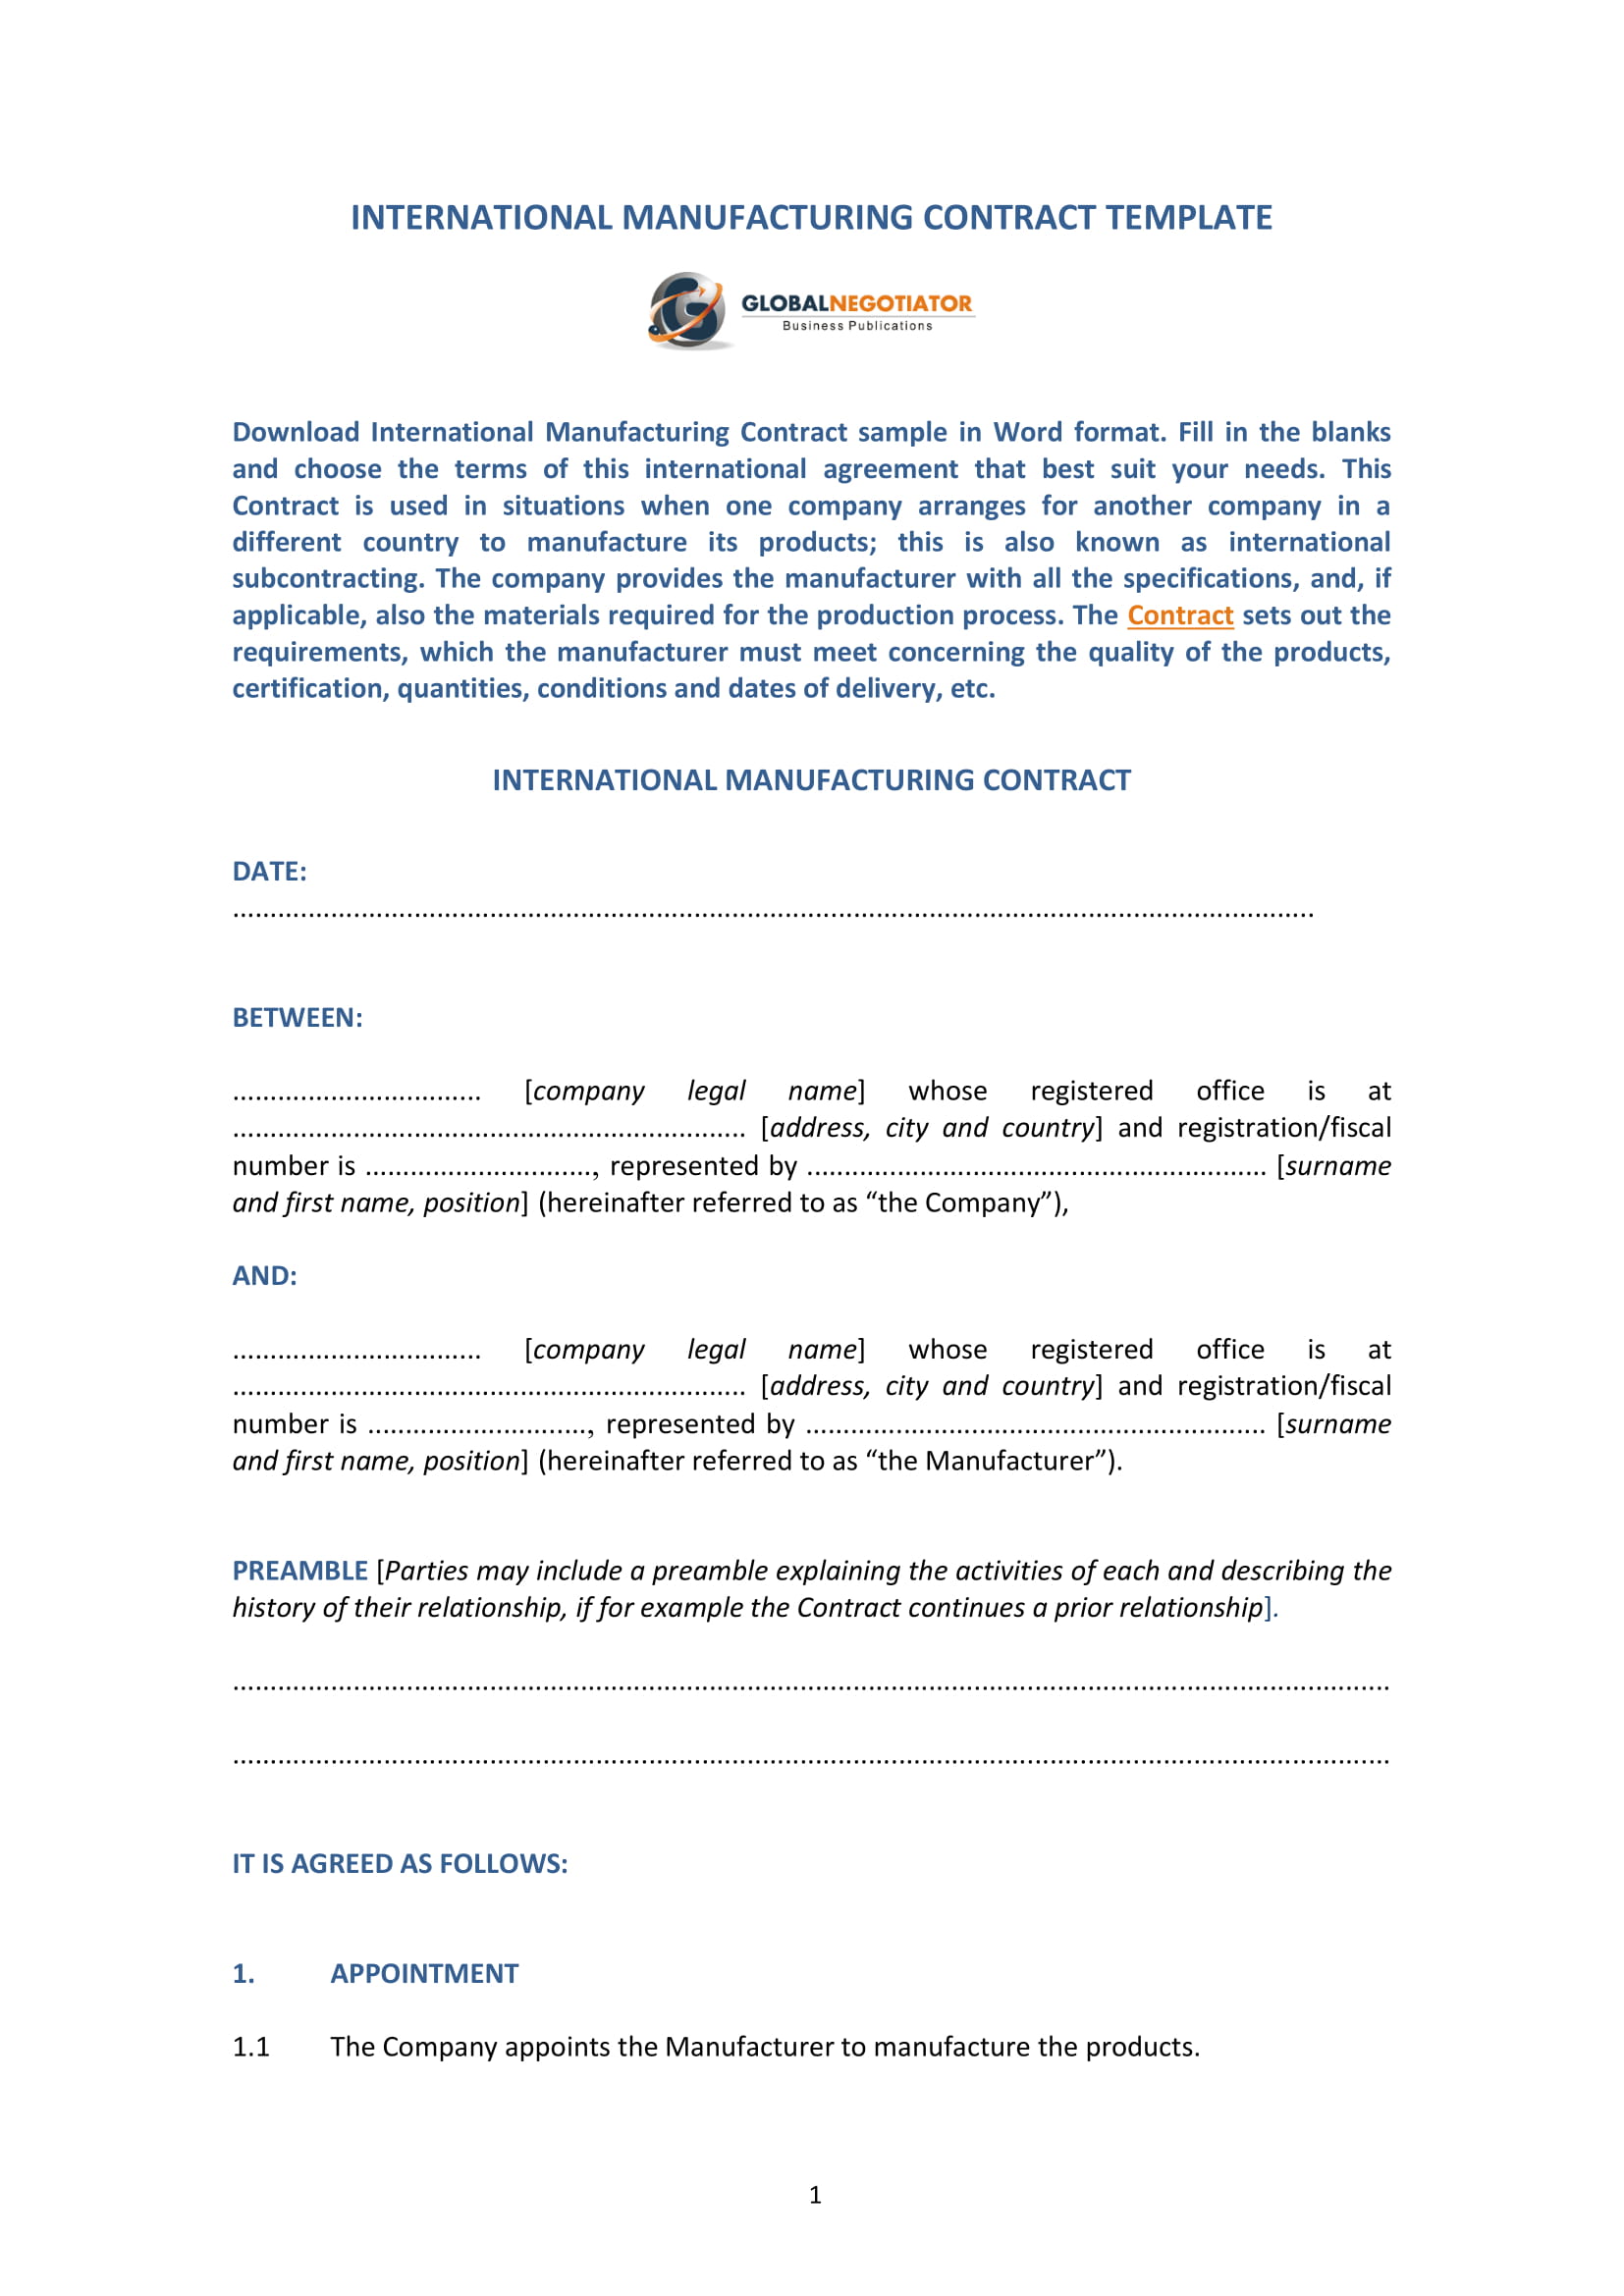 international manufacturing contract agreement template example 1